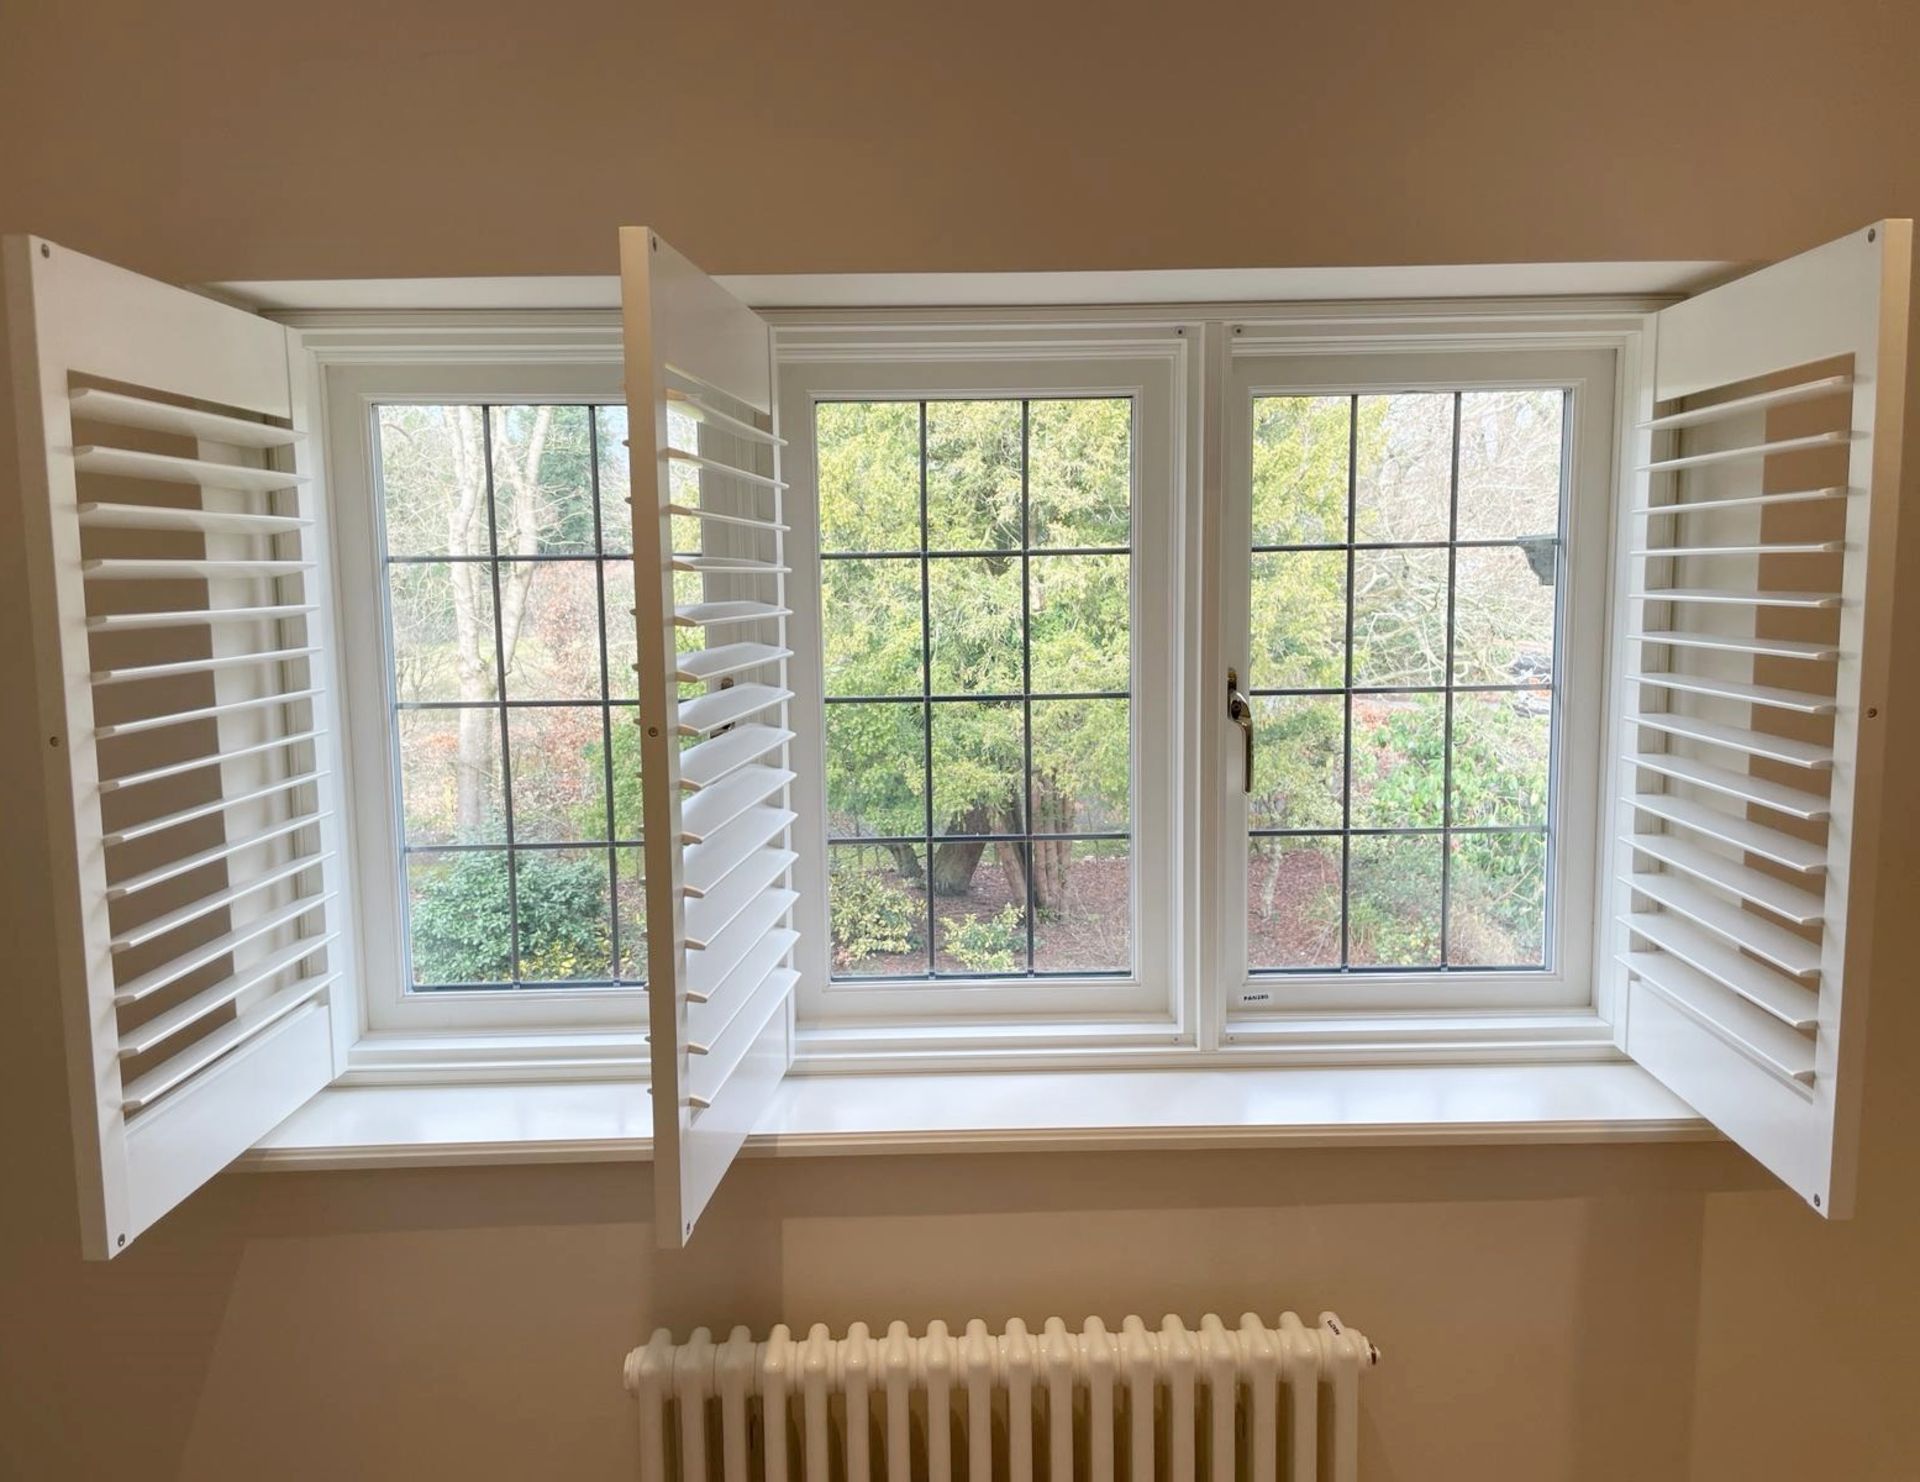 1 x Hardwood Timber Double Glazed Leaded 3-Pane Window Frame fitted with Shutter Blinds - Image 3 of 17